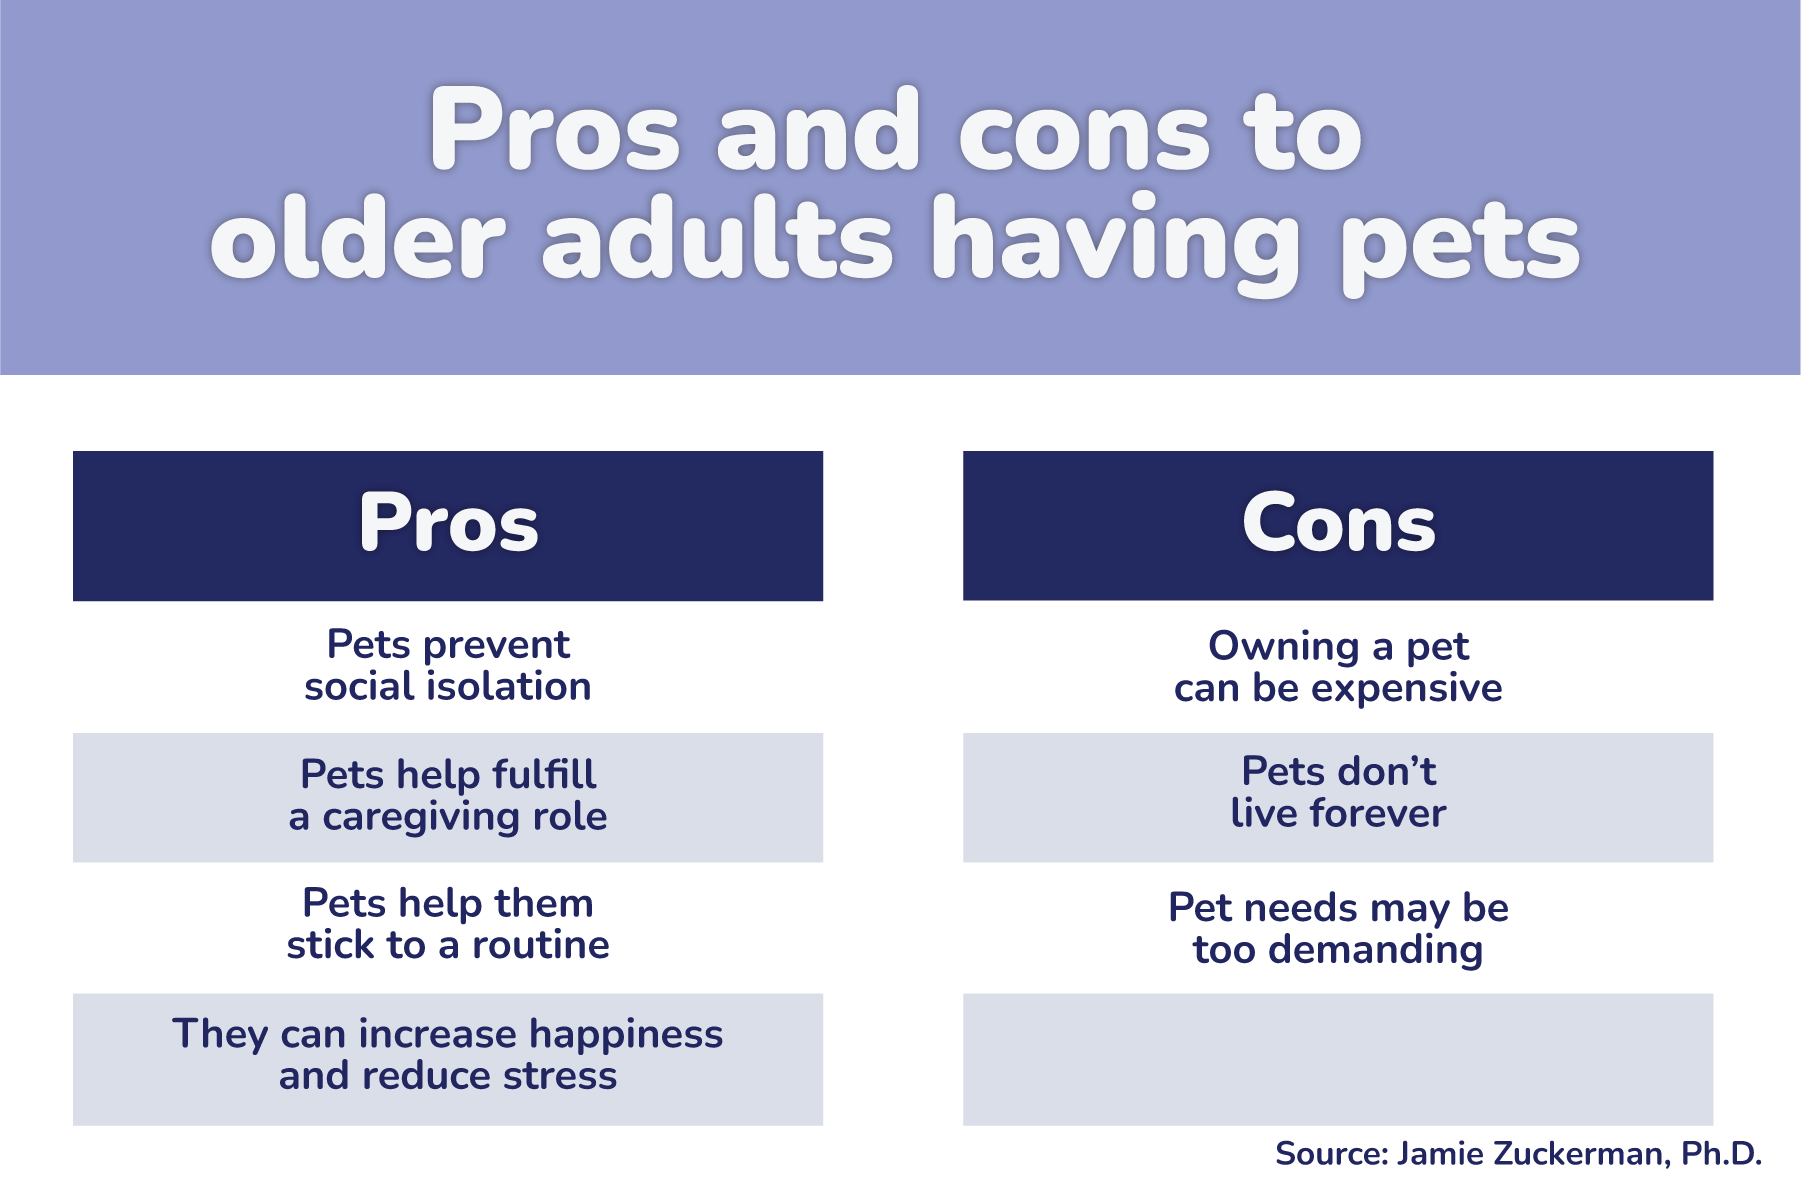 Pros & cons to older adults having pets